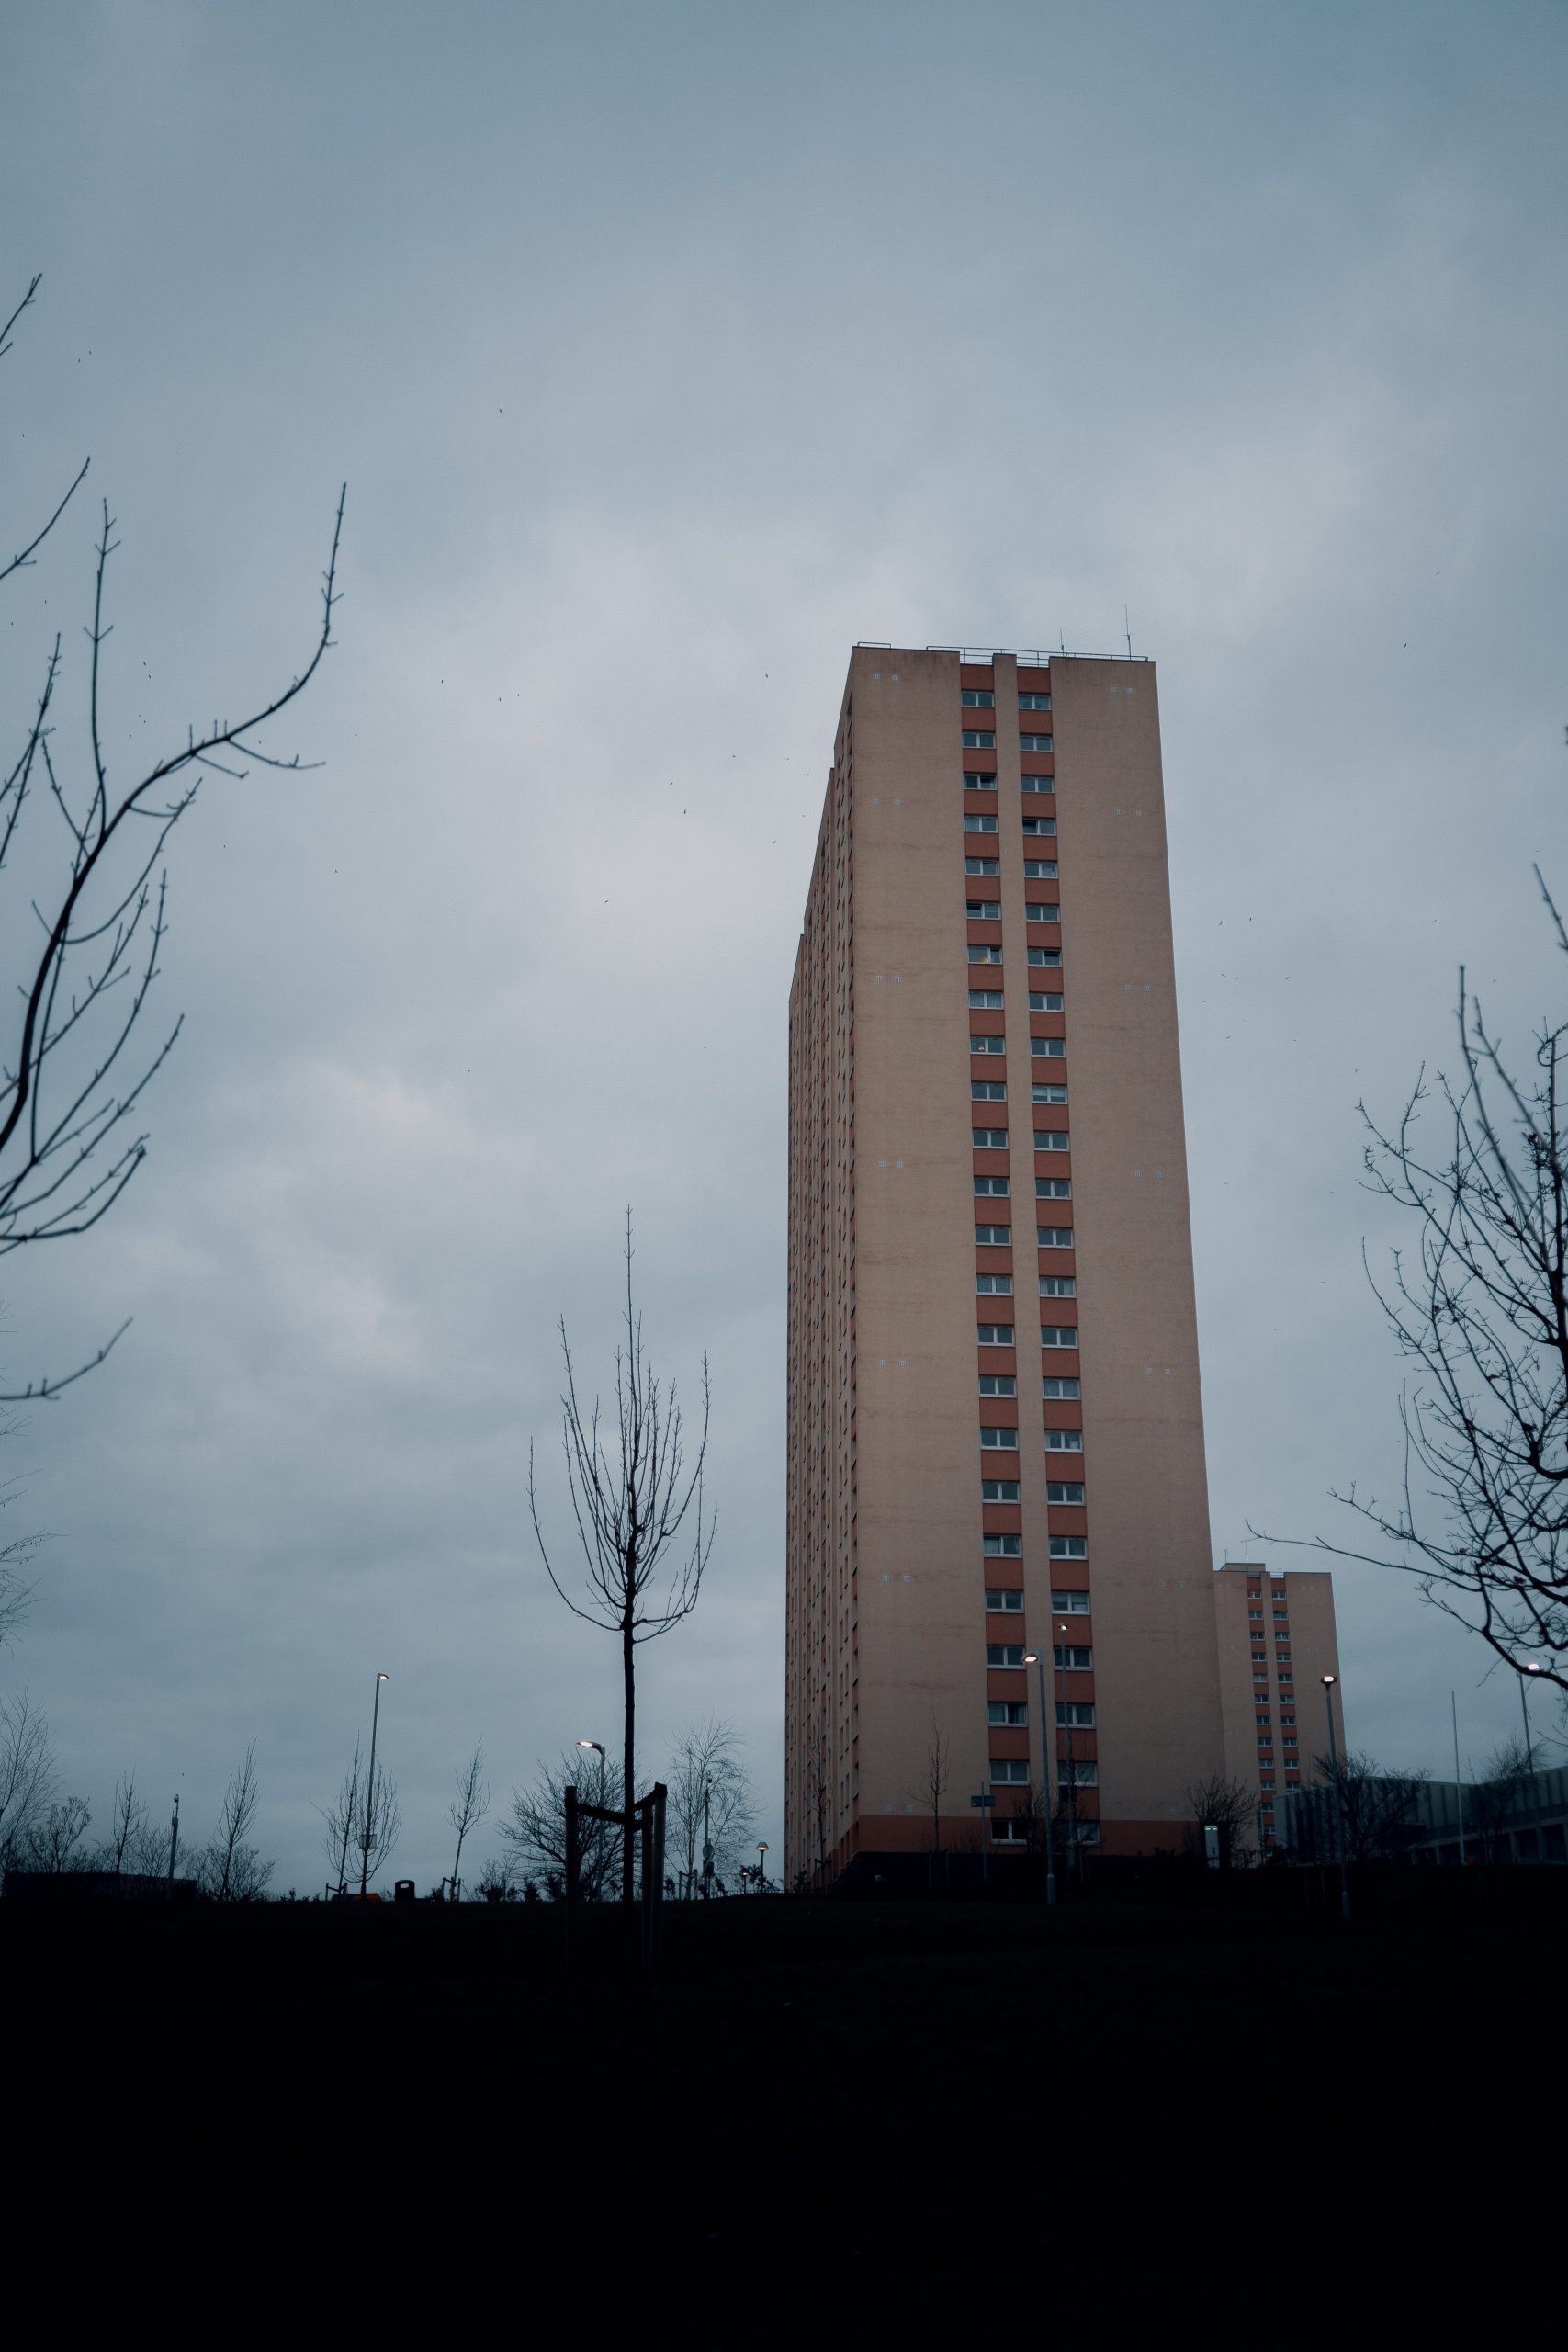 A wide shot of a high rise flat building in England